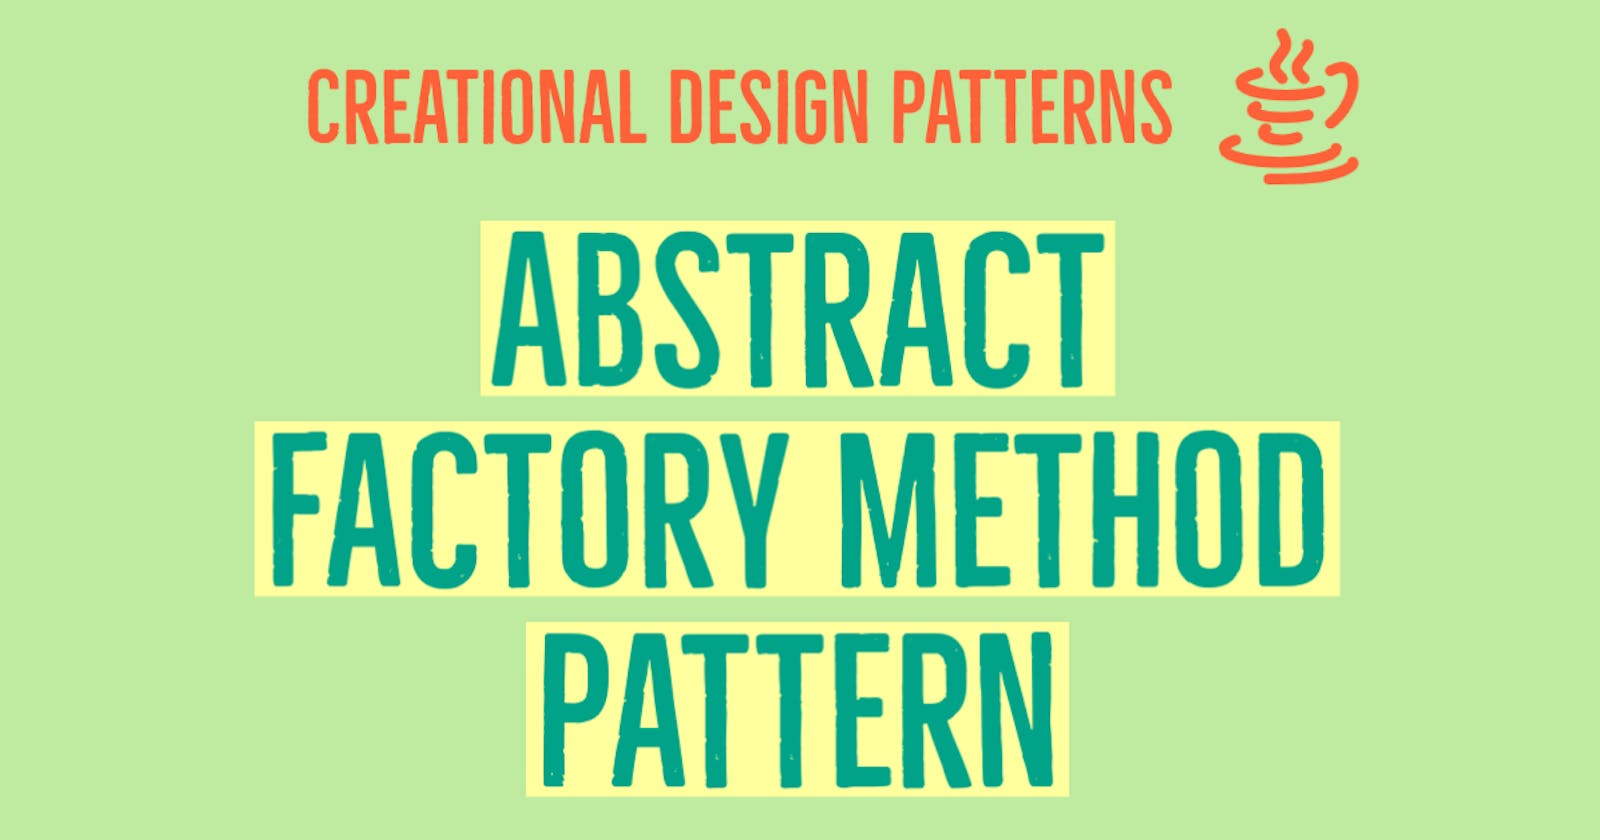 Abstract Factory Method Pattern